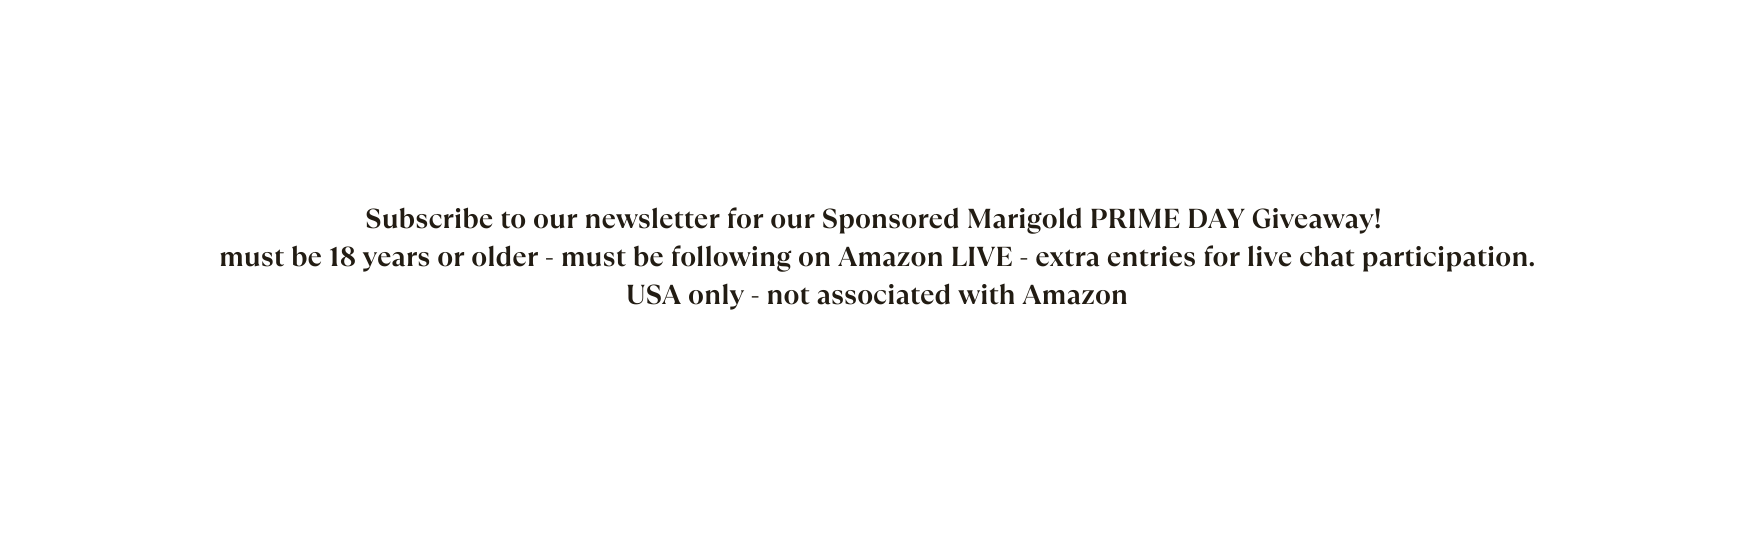 Subscribe to our newsletter for our Sponsored Marigold PRIME DAY Giveaway must be 18 years or older must be following on Amazon LIVE extra entries for live chat participation USA only not associated with Amazon